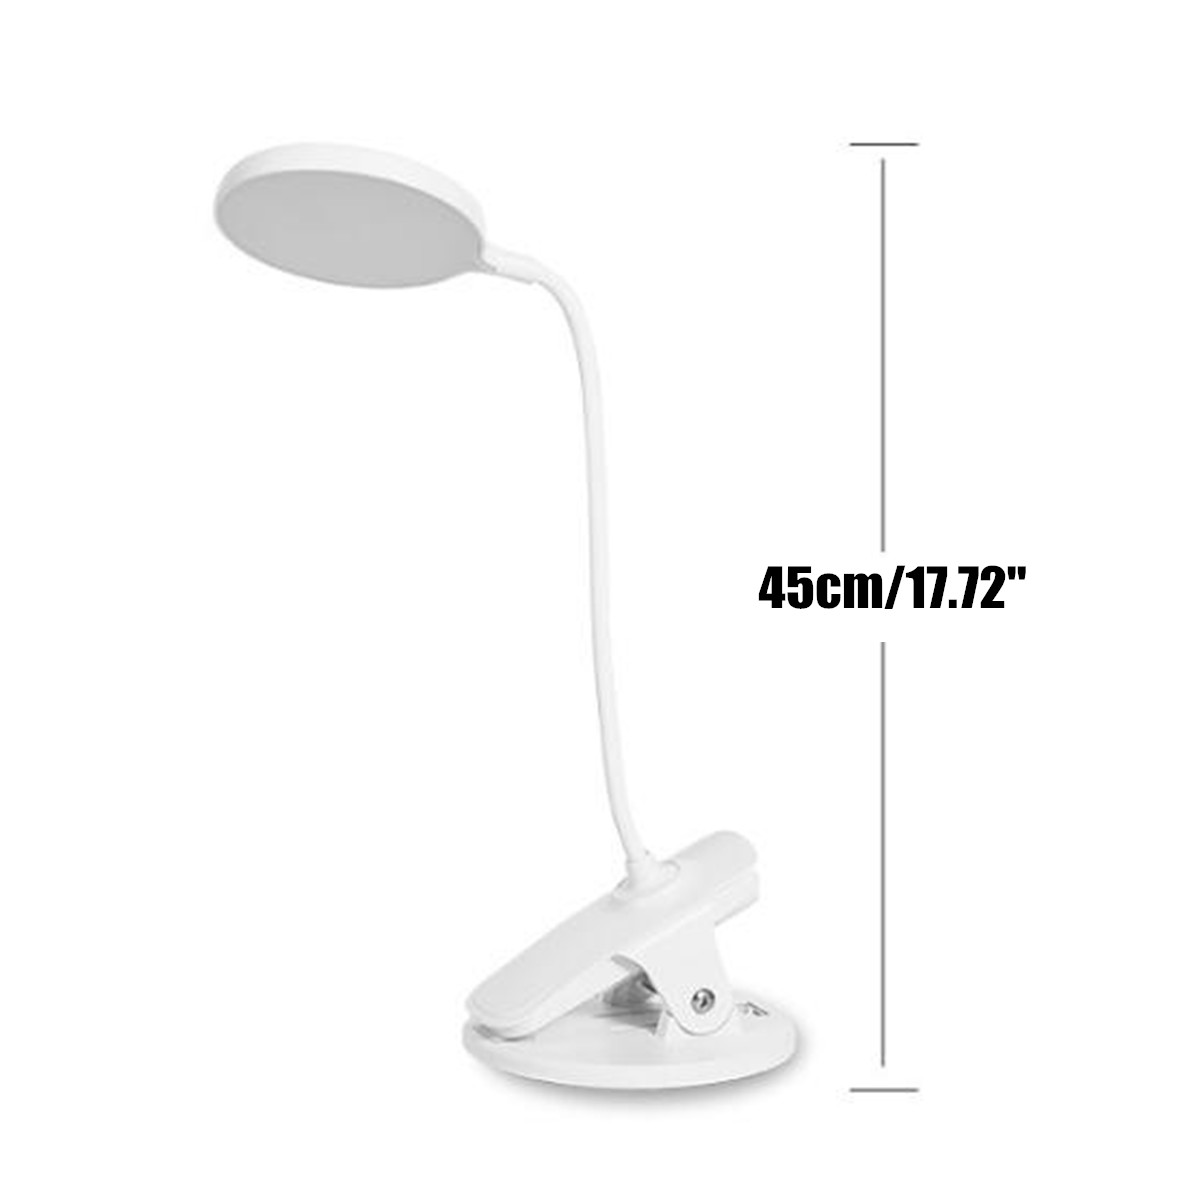 Bakeey-USB-Rechargeable-LED-Desk-Lights-Clip-Flexible-Eye-Protection-Reading-Touch-Lamp-USB-Charger-1613293